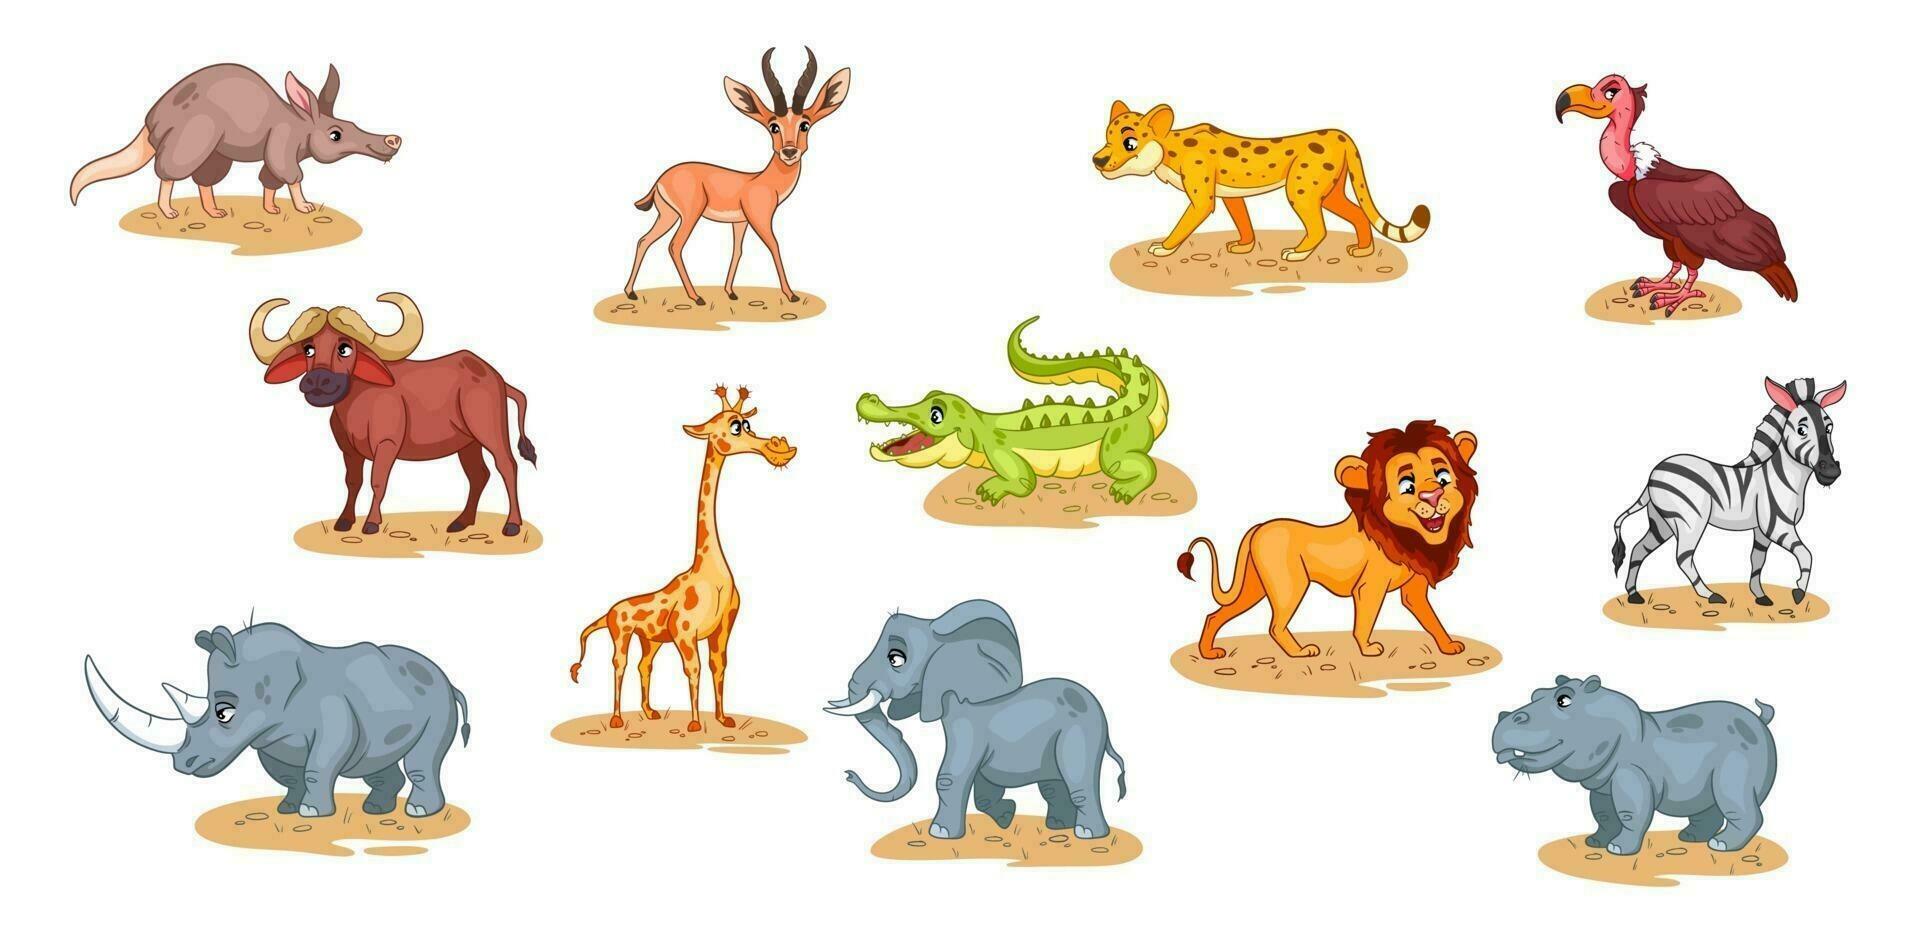 Large set of African animals. Funny animal characters in cartoon style. vector